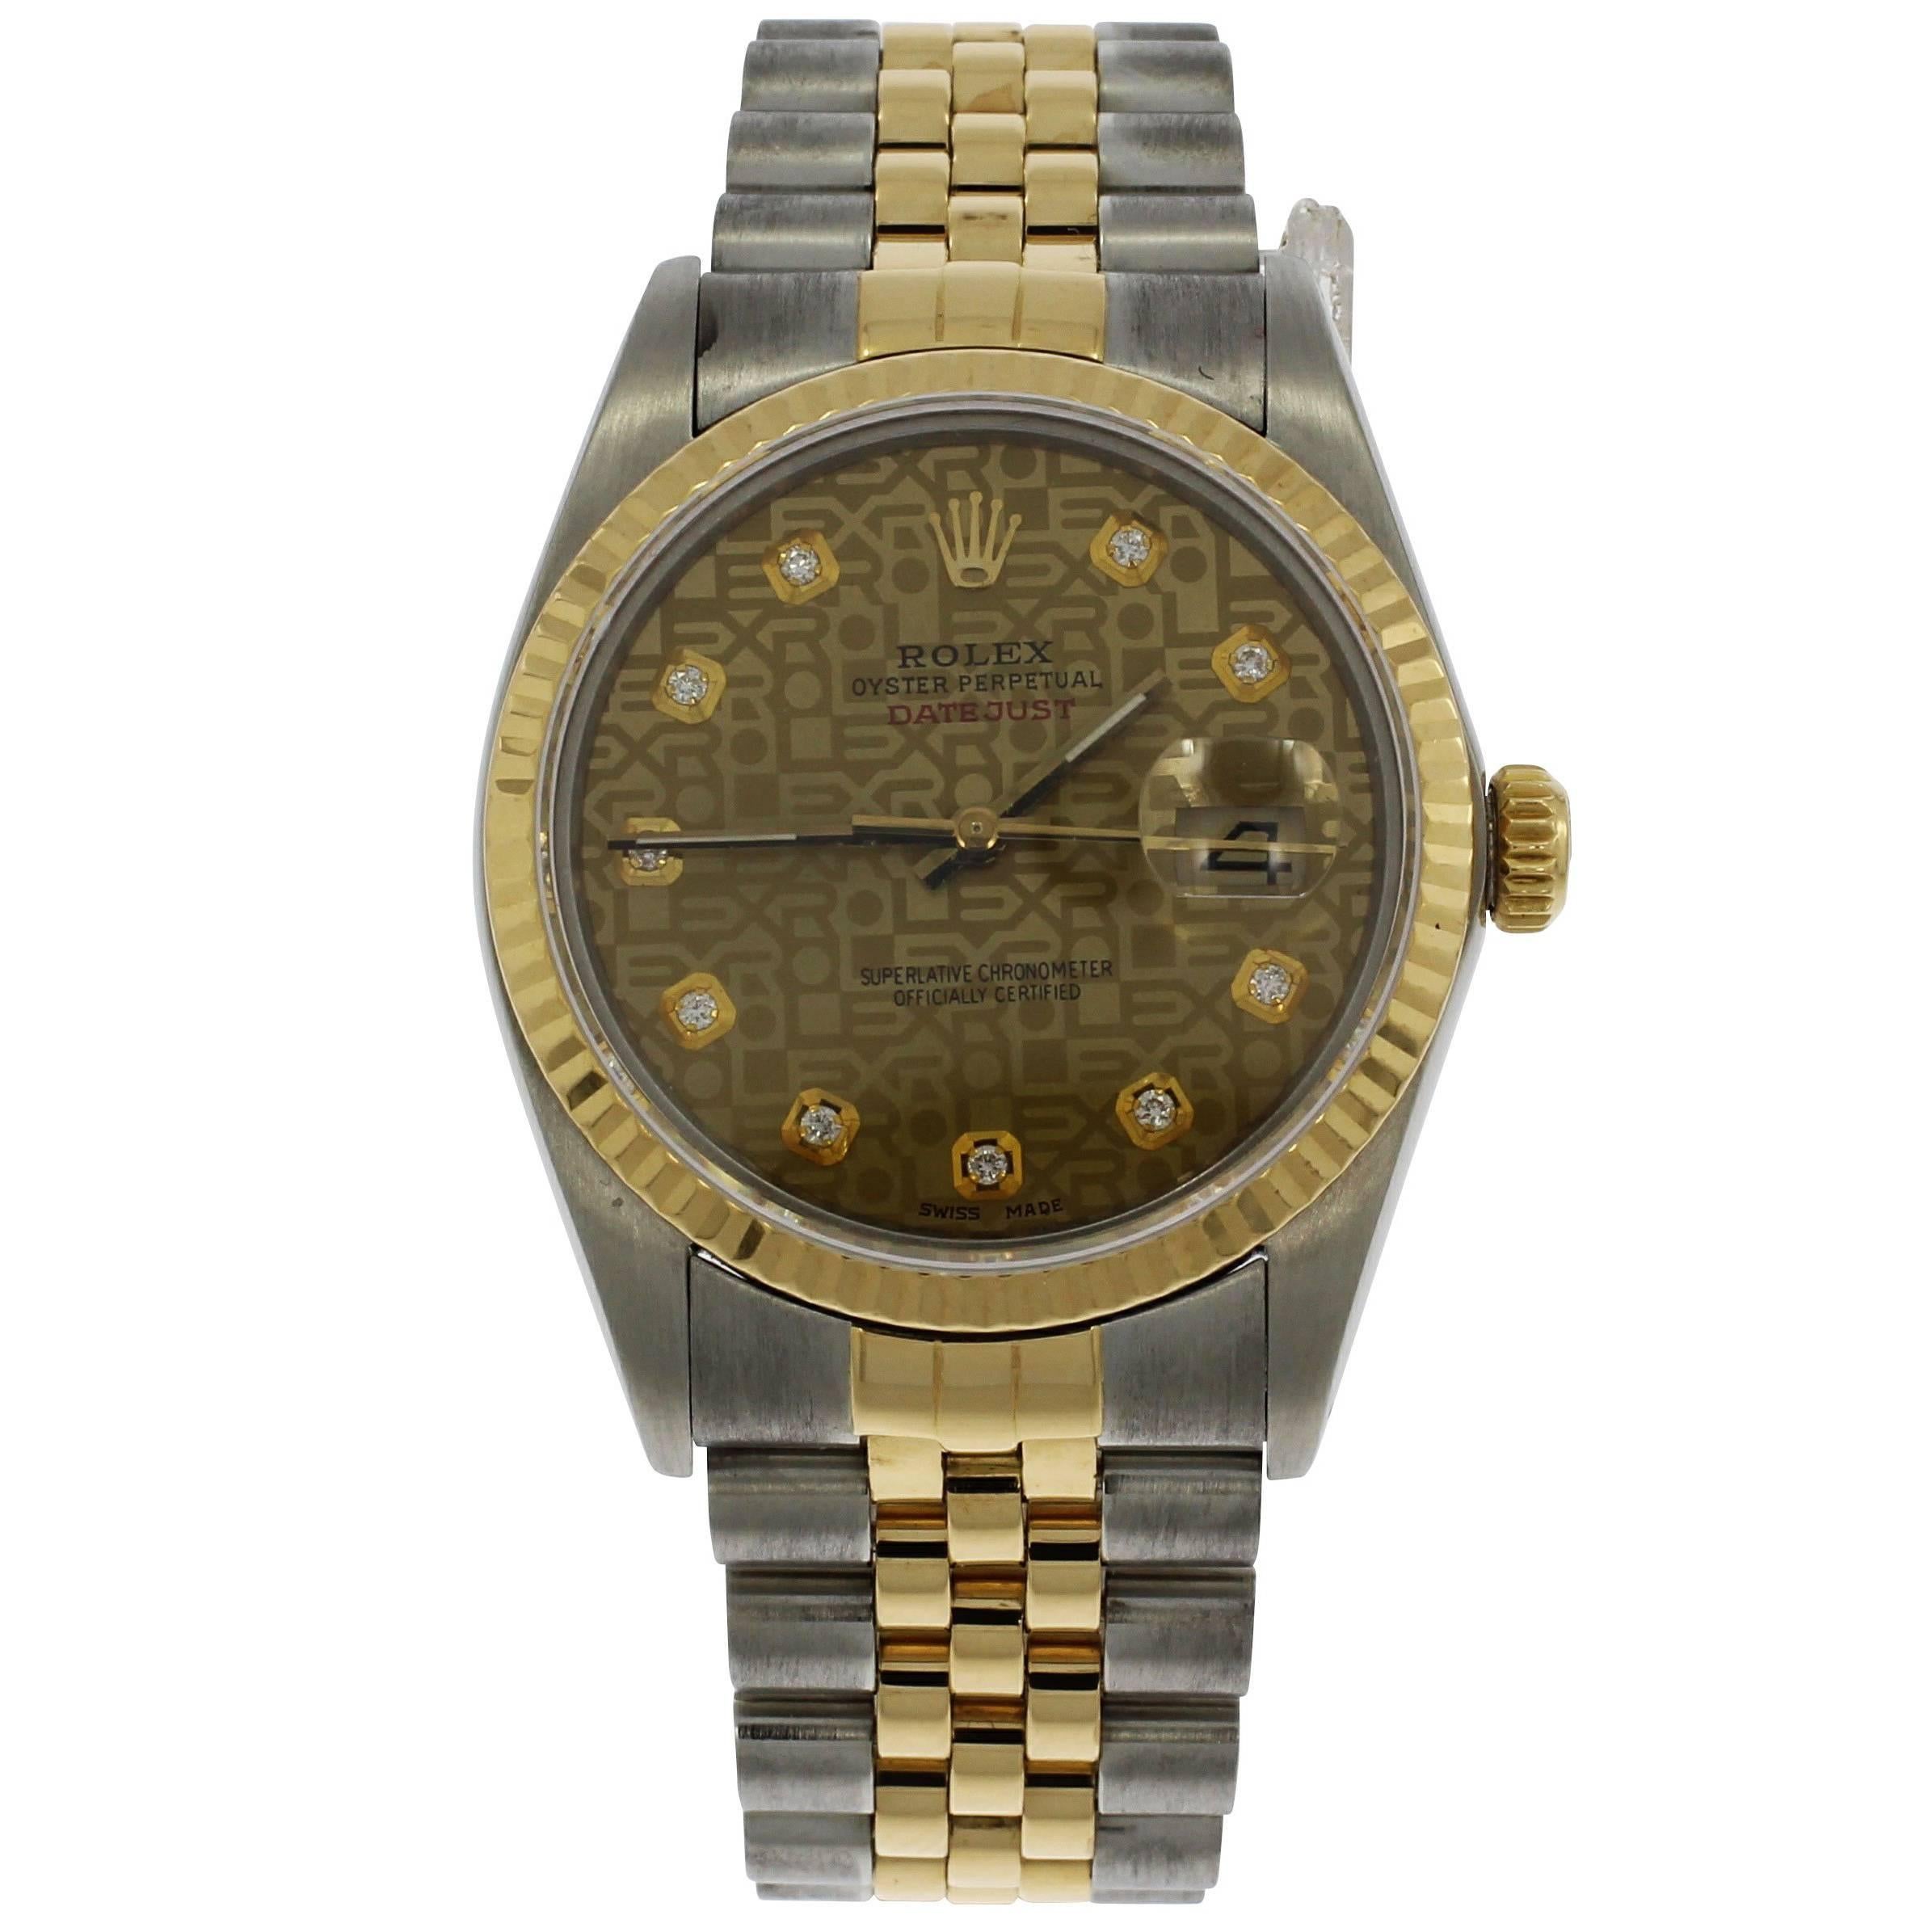 Rolex Yellow Gold Stainless Steel Datejust Jubilee Dial Wristwatch, 1986